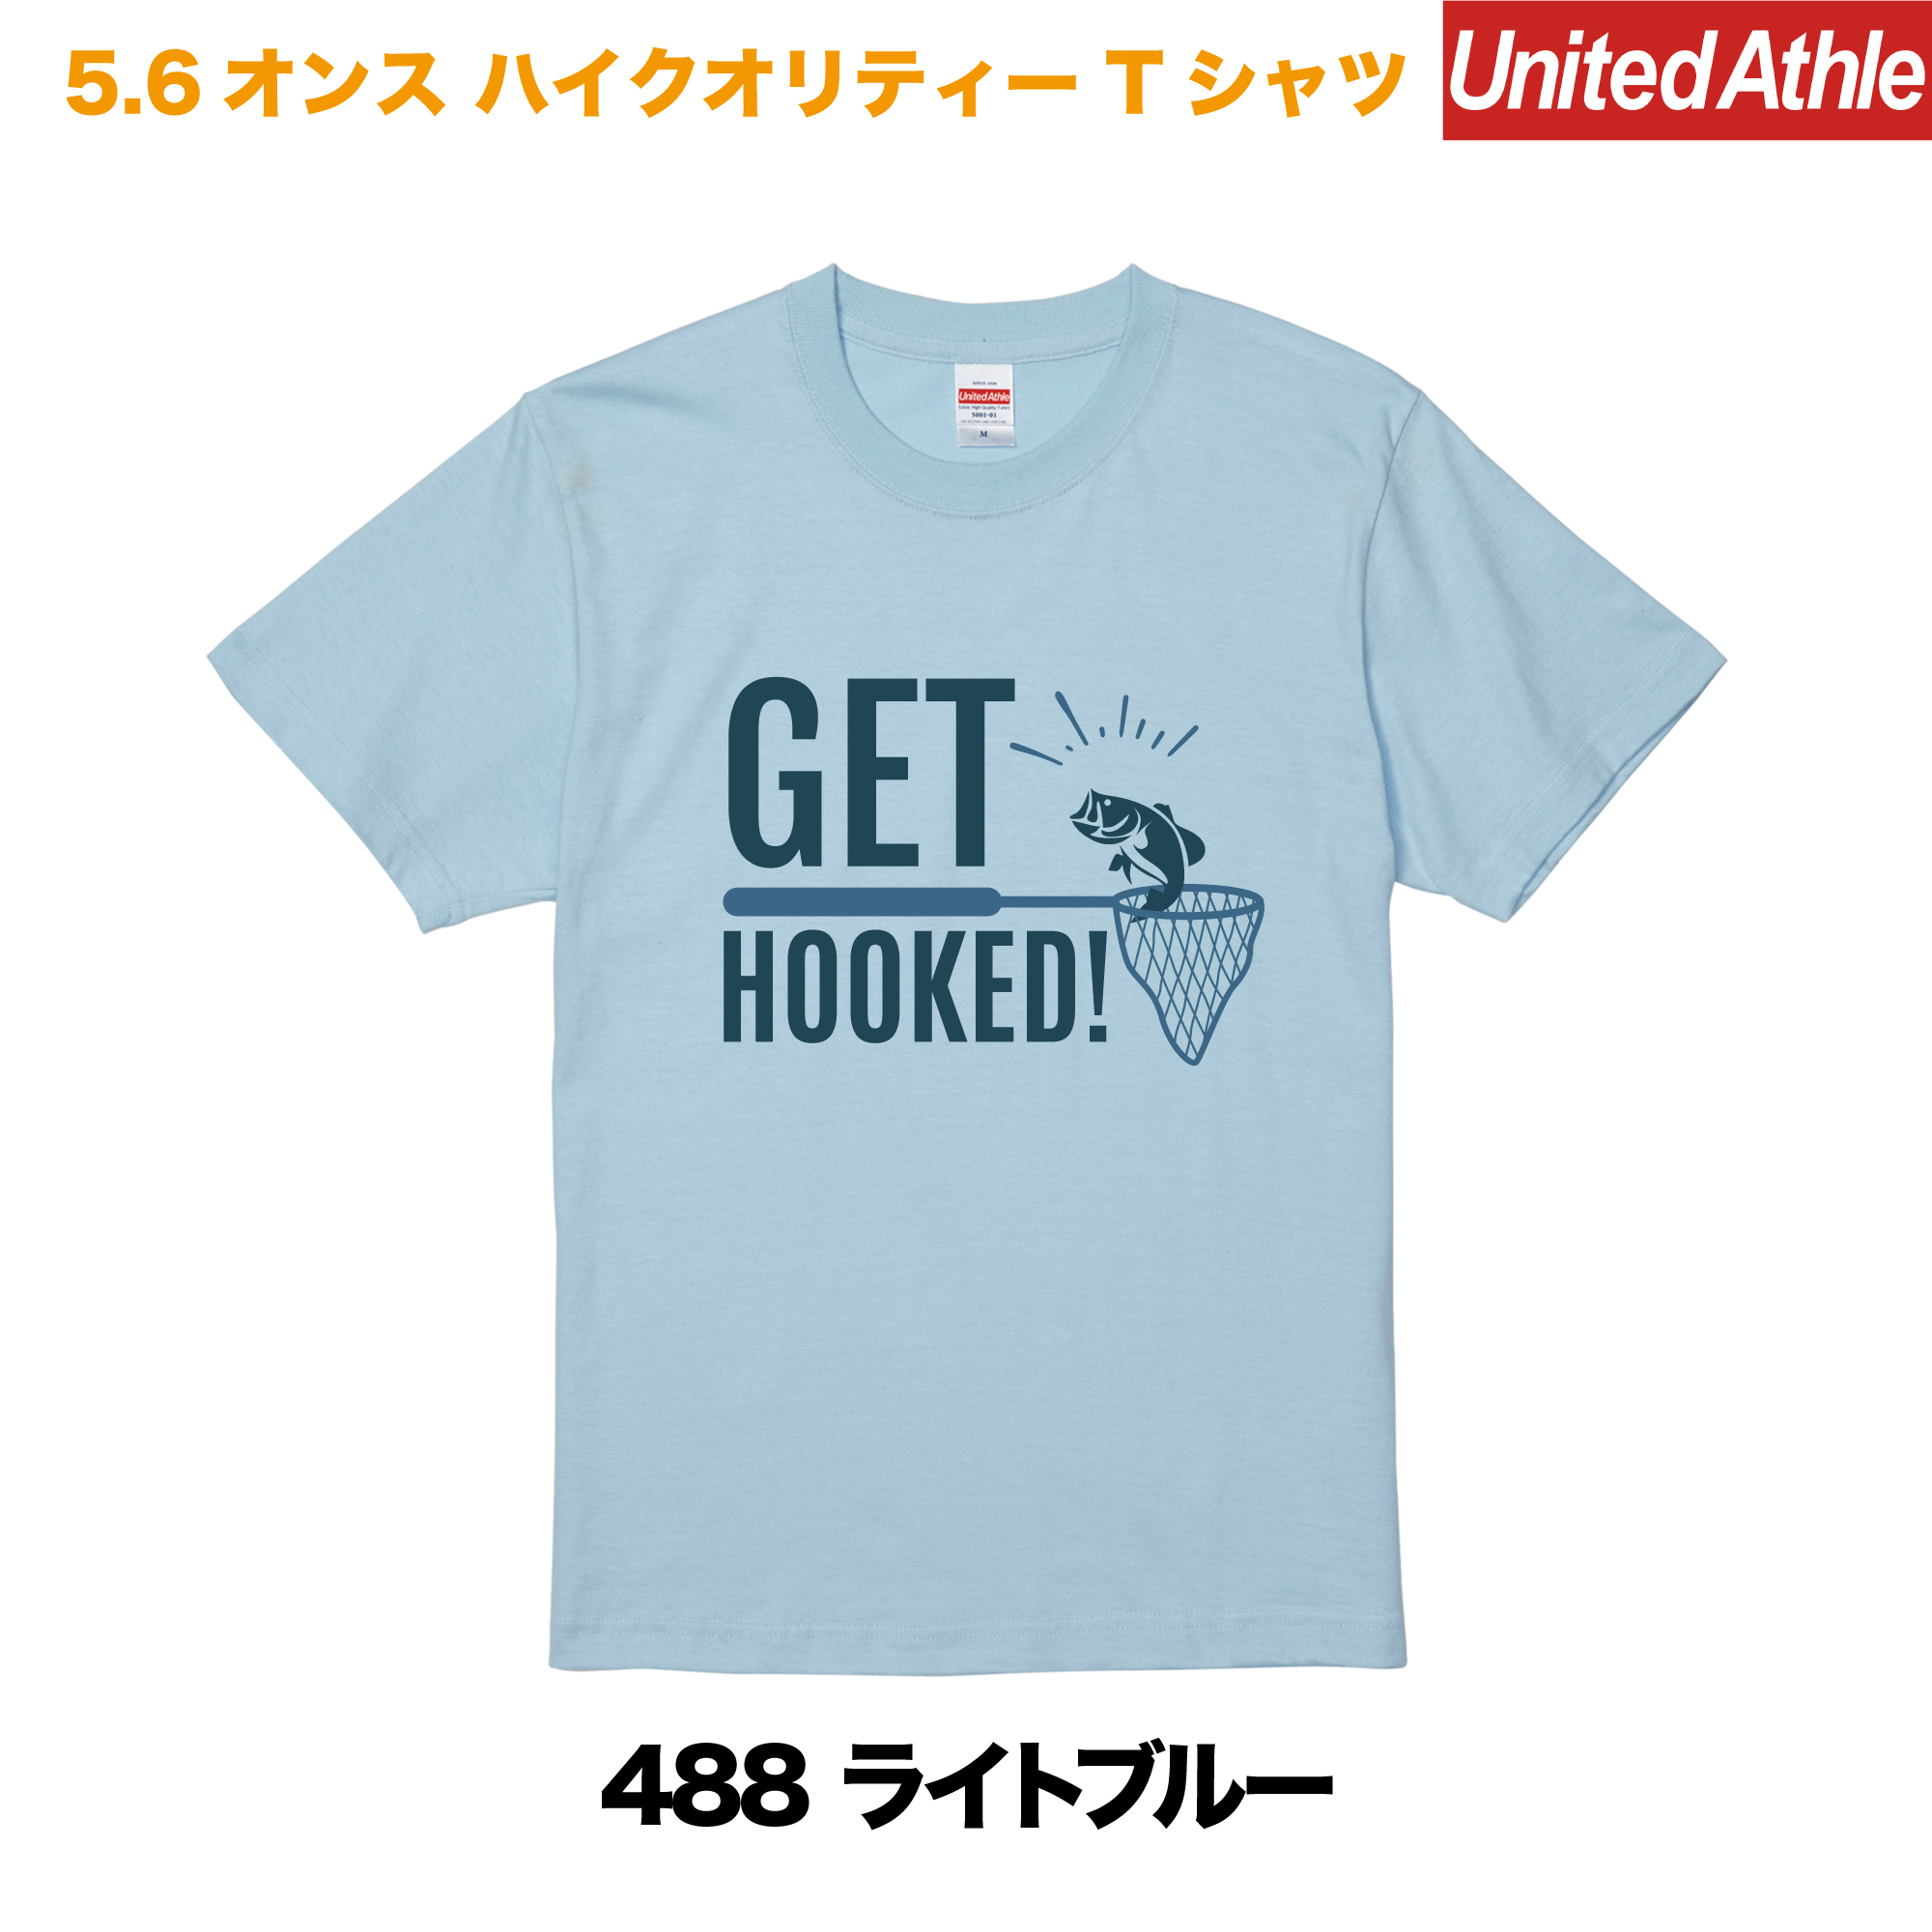 GET HOOKED　プリントTシャツ　5001-01【ライトブルー】＜アダルト＞